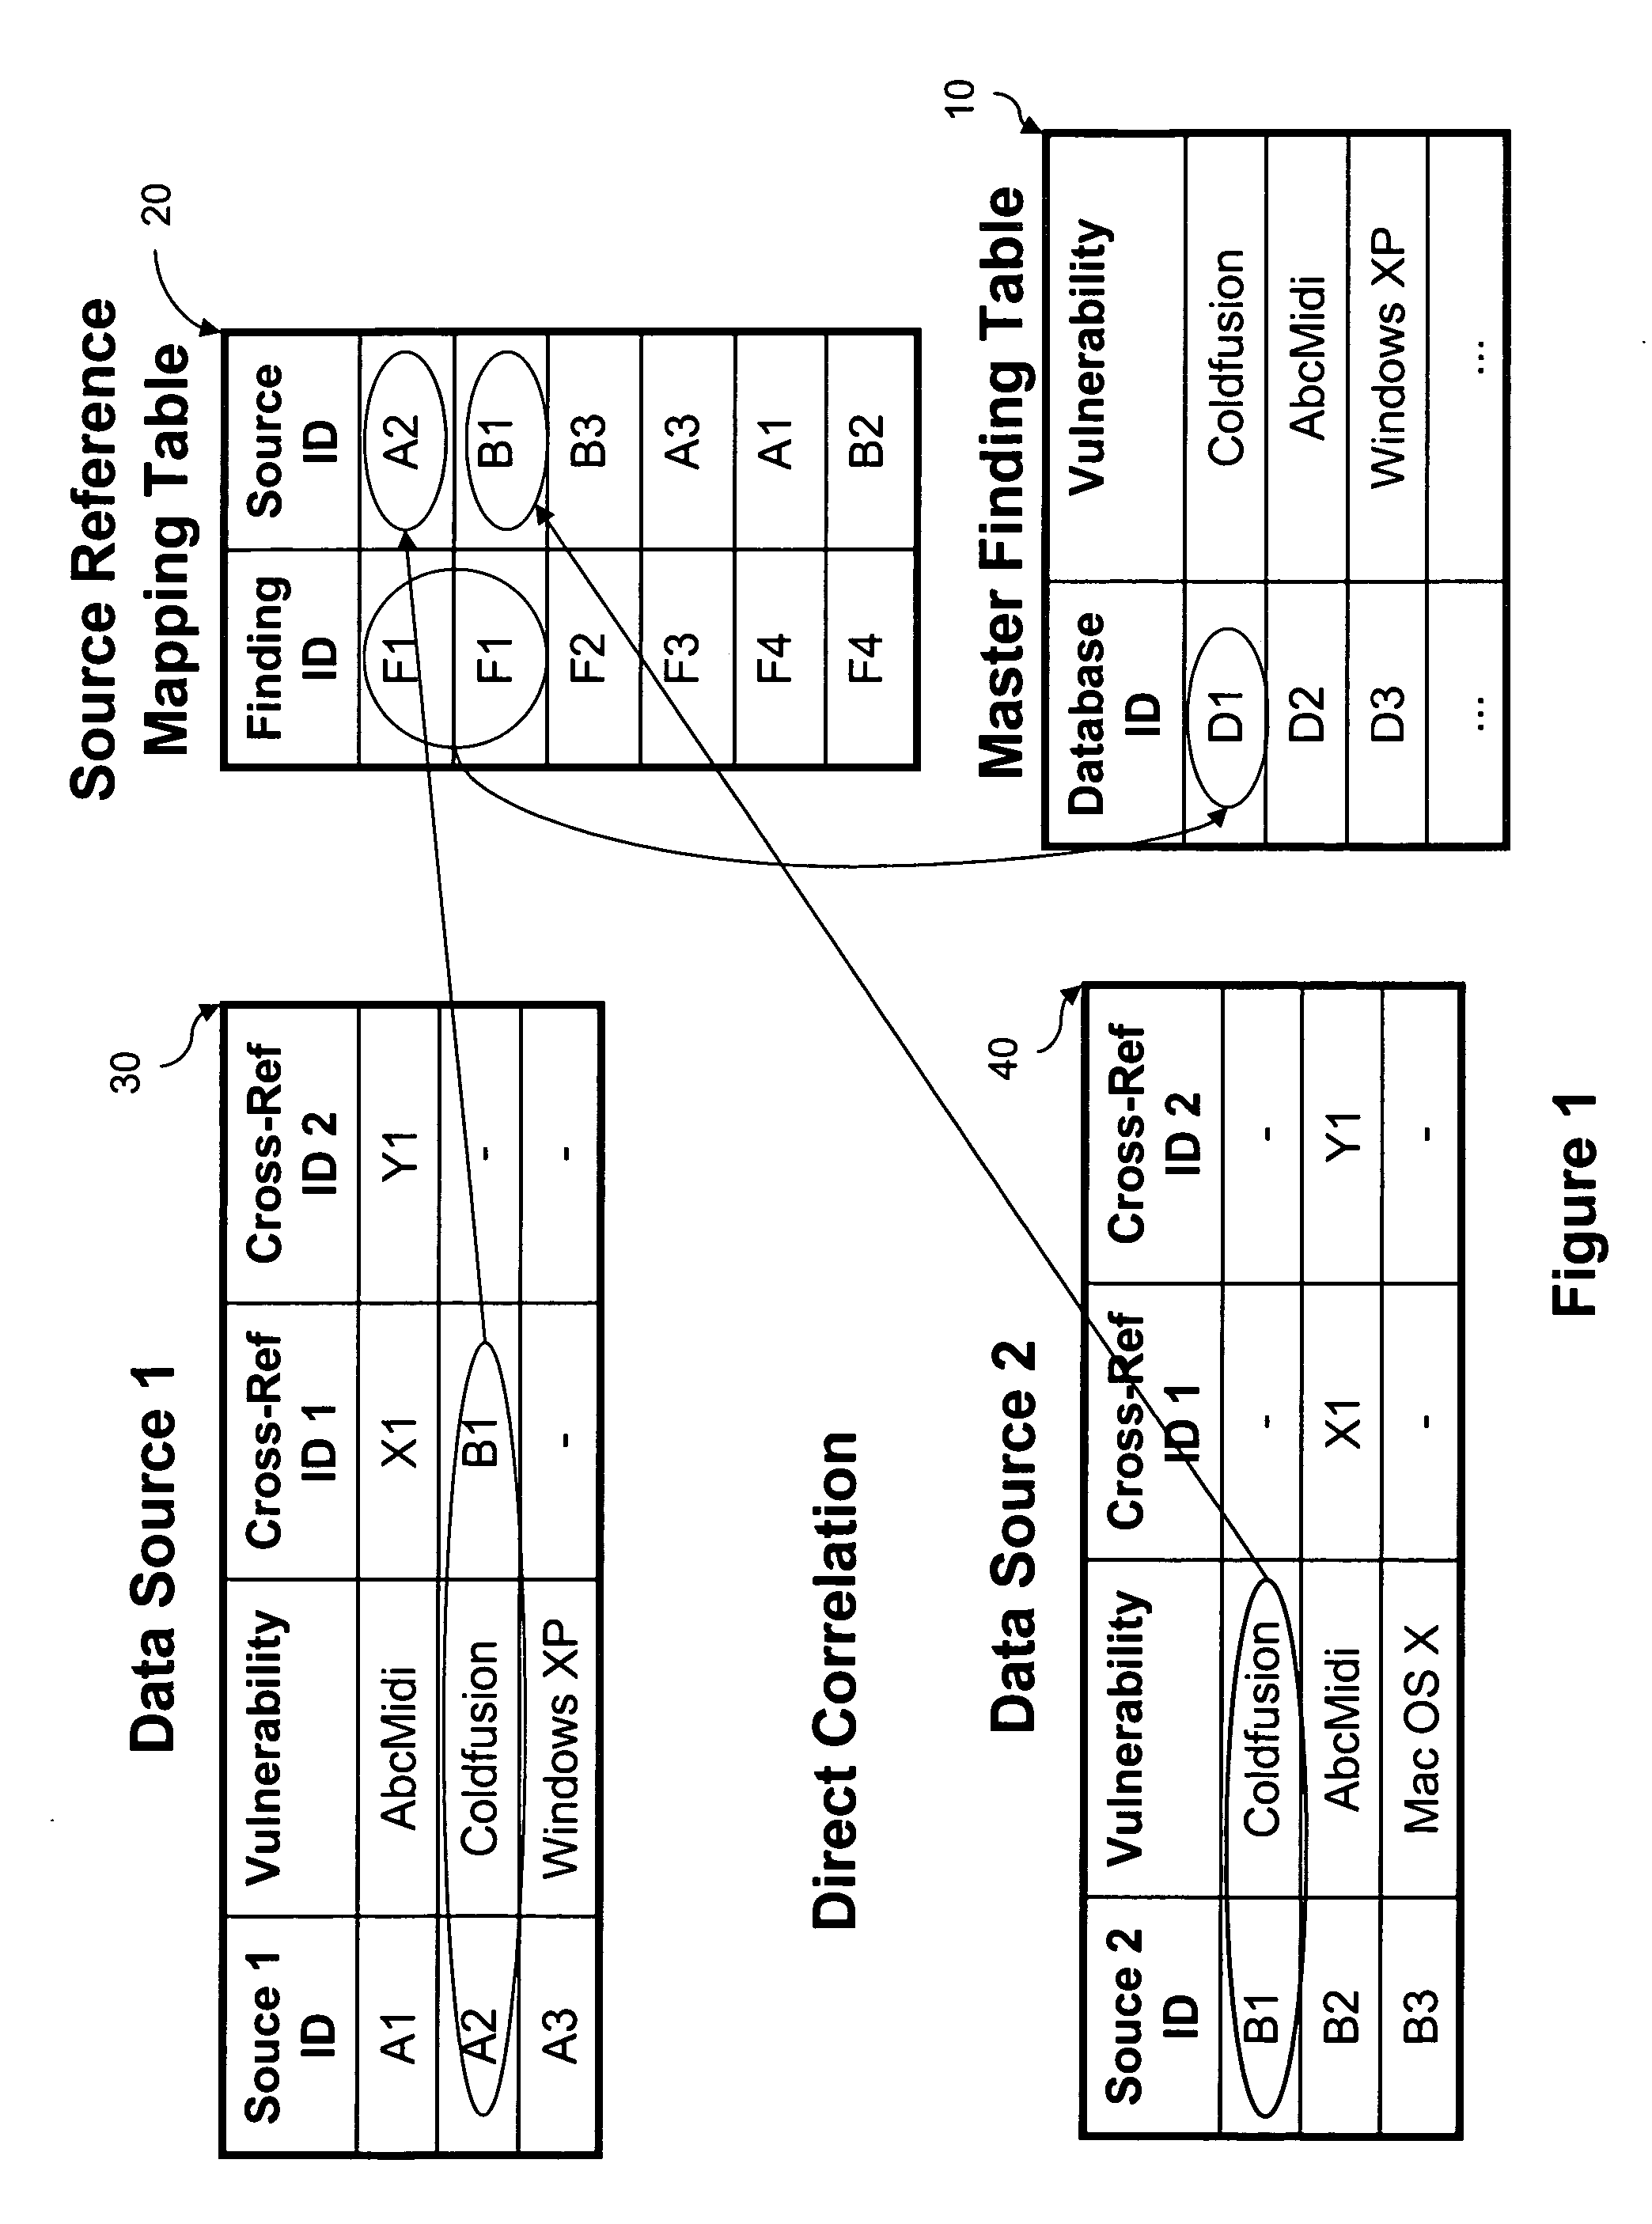 System and method for managing security testing